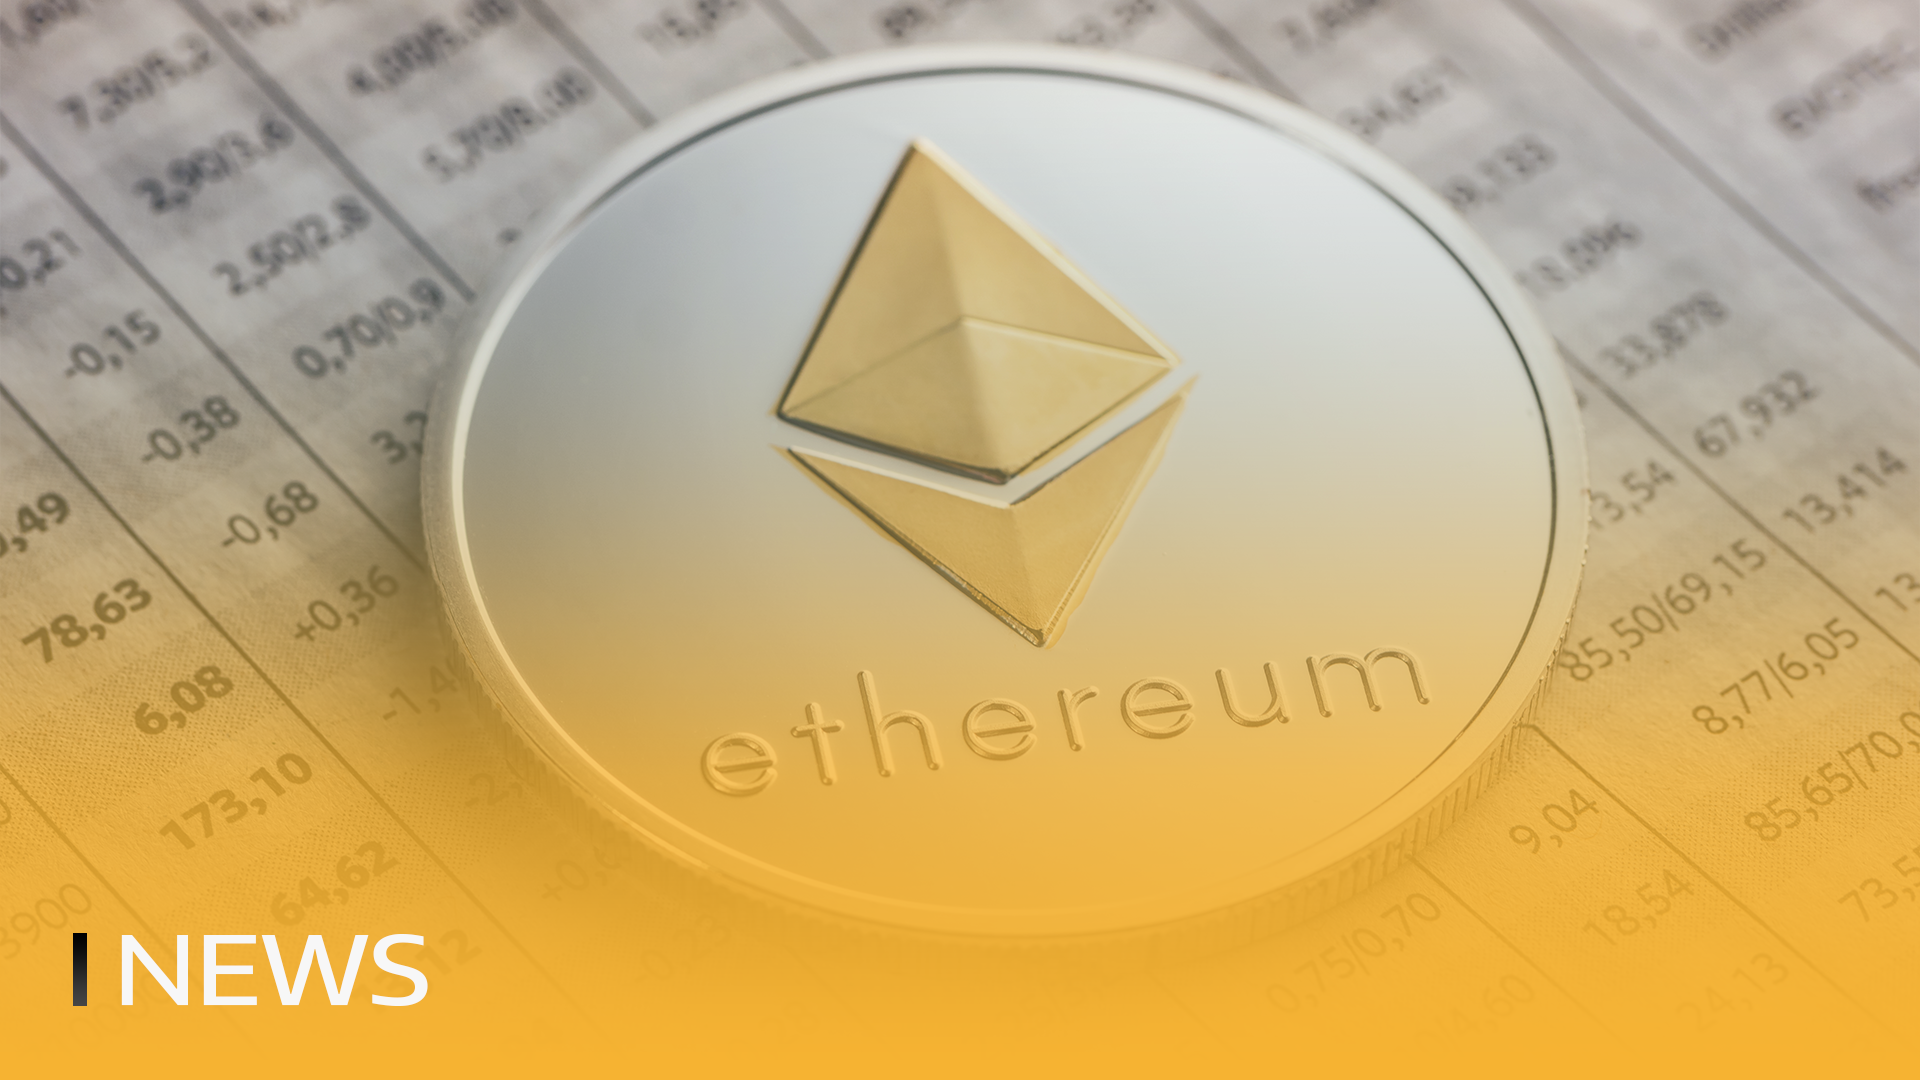 SEC Delays Ethereum ETF Decisions to May